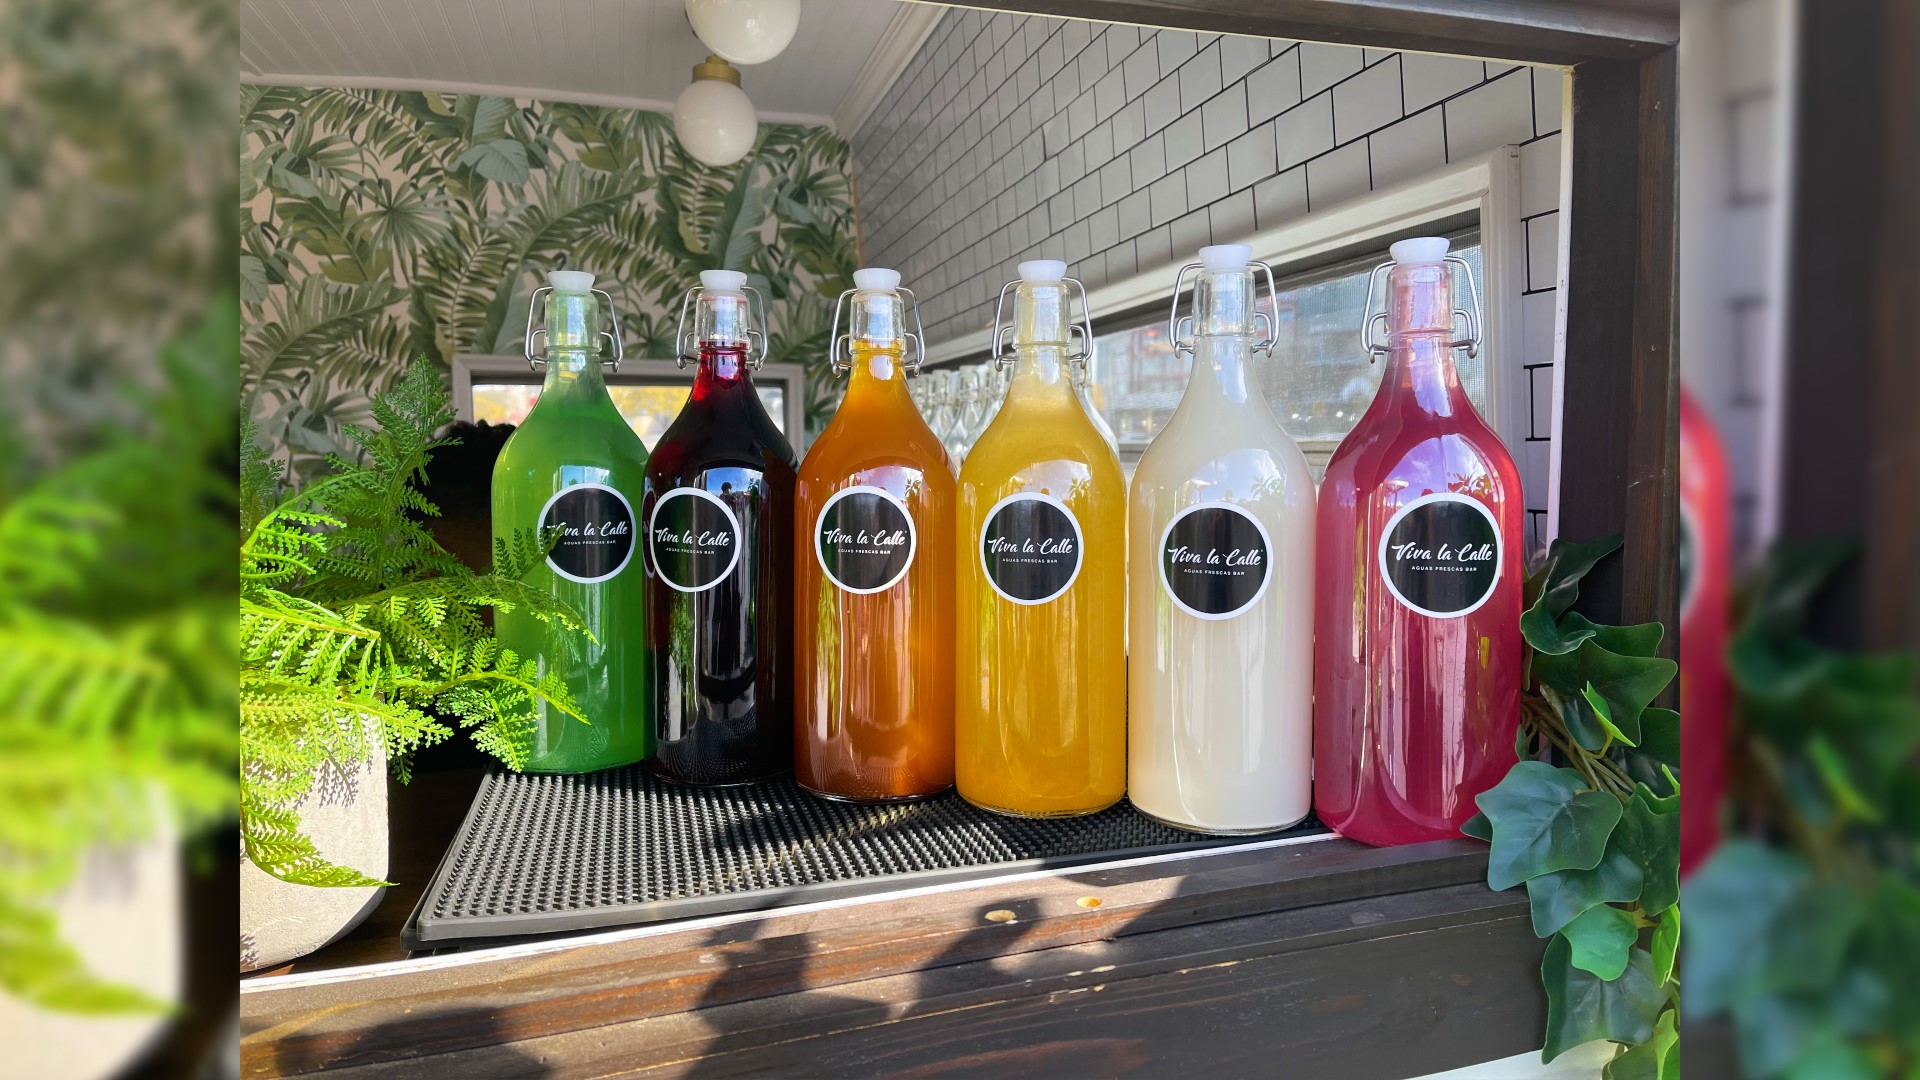 After coming to San Antonio five years ago from Mexico, one local business owner saw the lack of agua frescas in San Antonio and did something to change that. 🍉